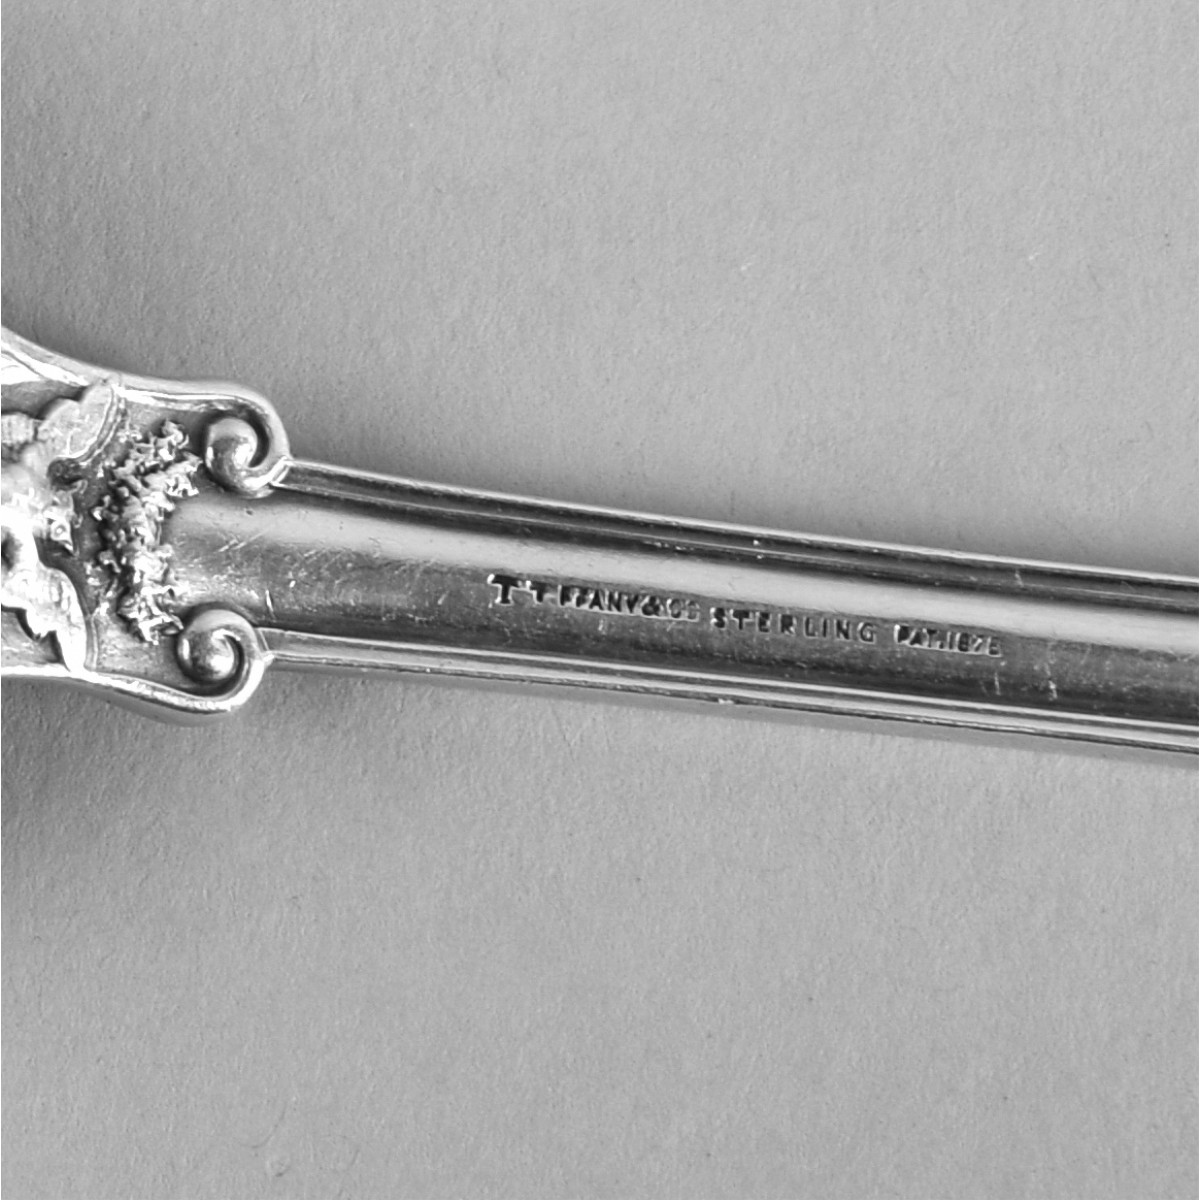 Tiffany & Co Sterling Cold Meat Forks